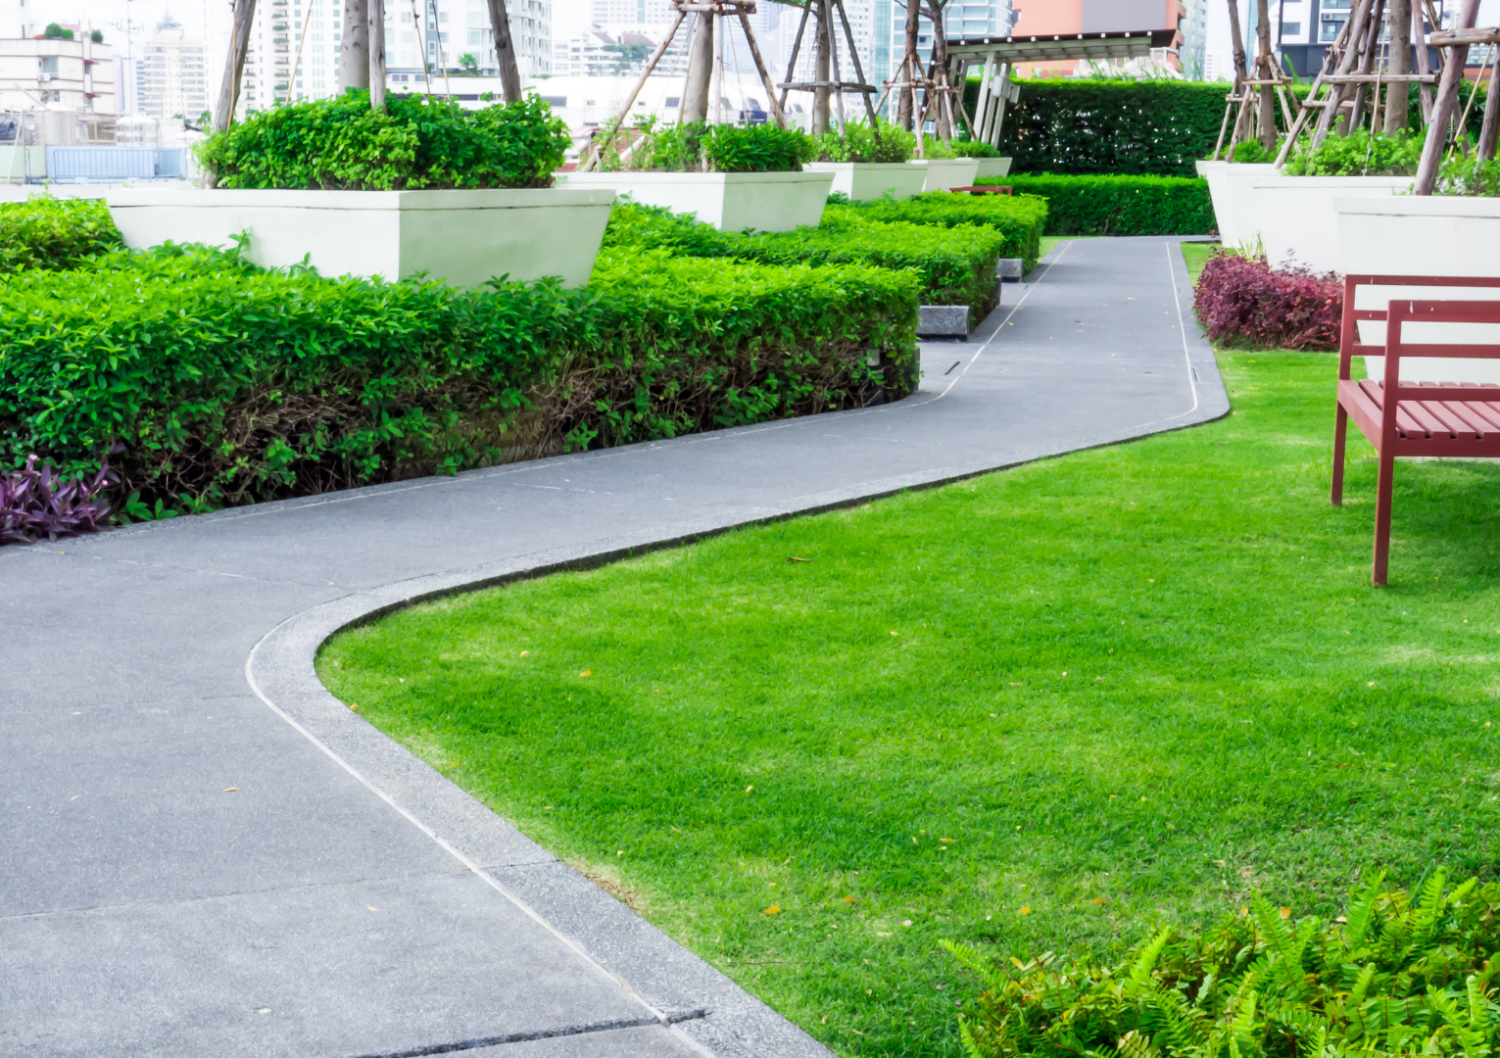 In fact, spaces like green roofs are soothing oases that allow people to connect with nature, socialize, and in turn, amplify their mood and spirit at the workplace. 